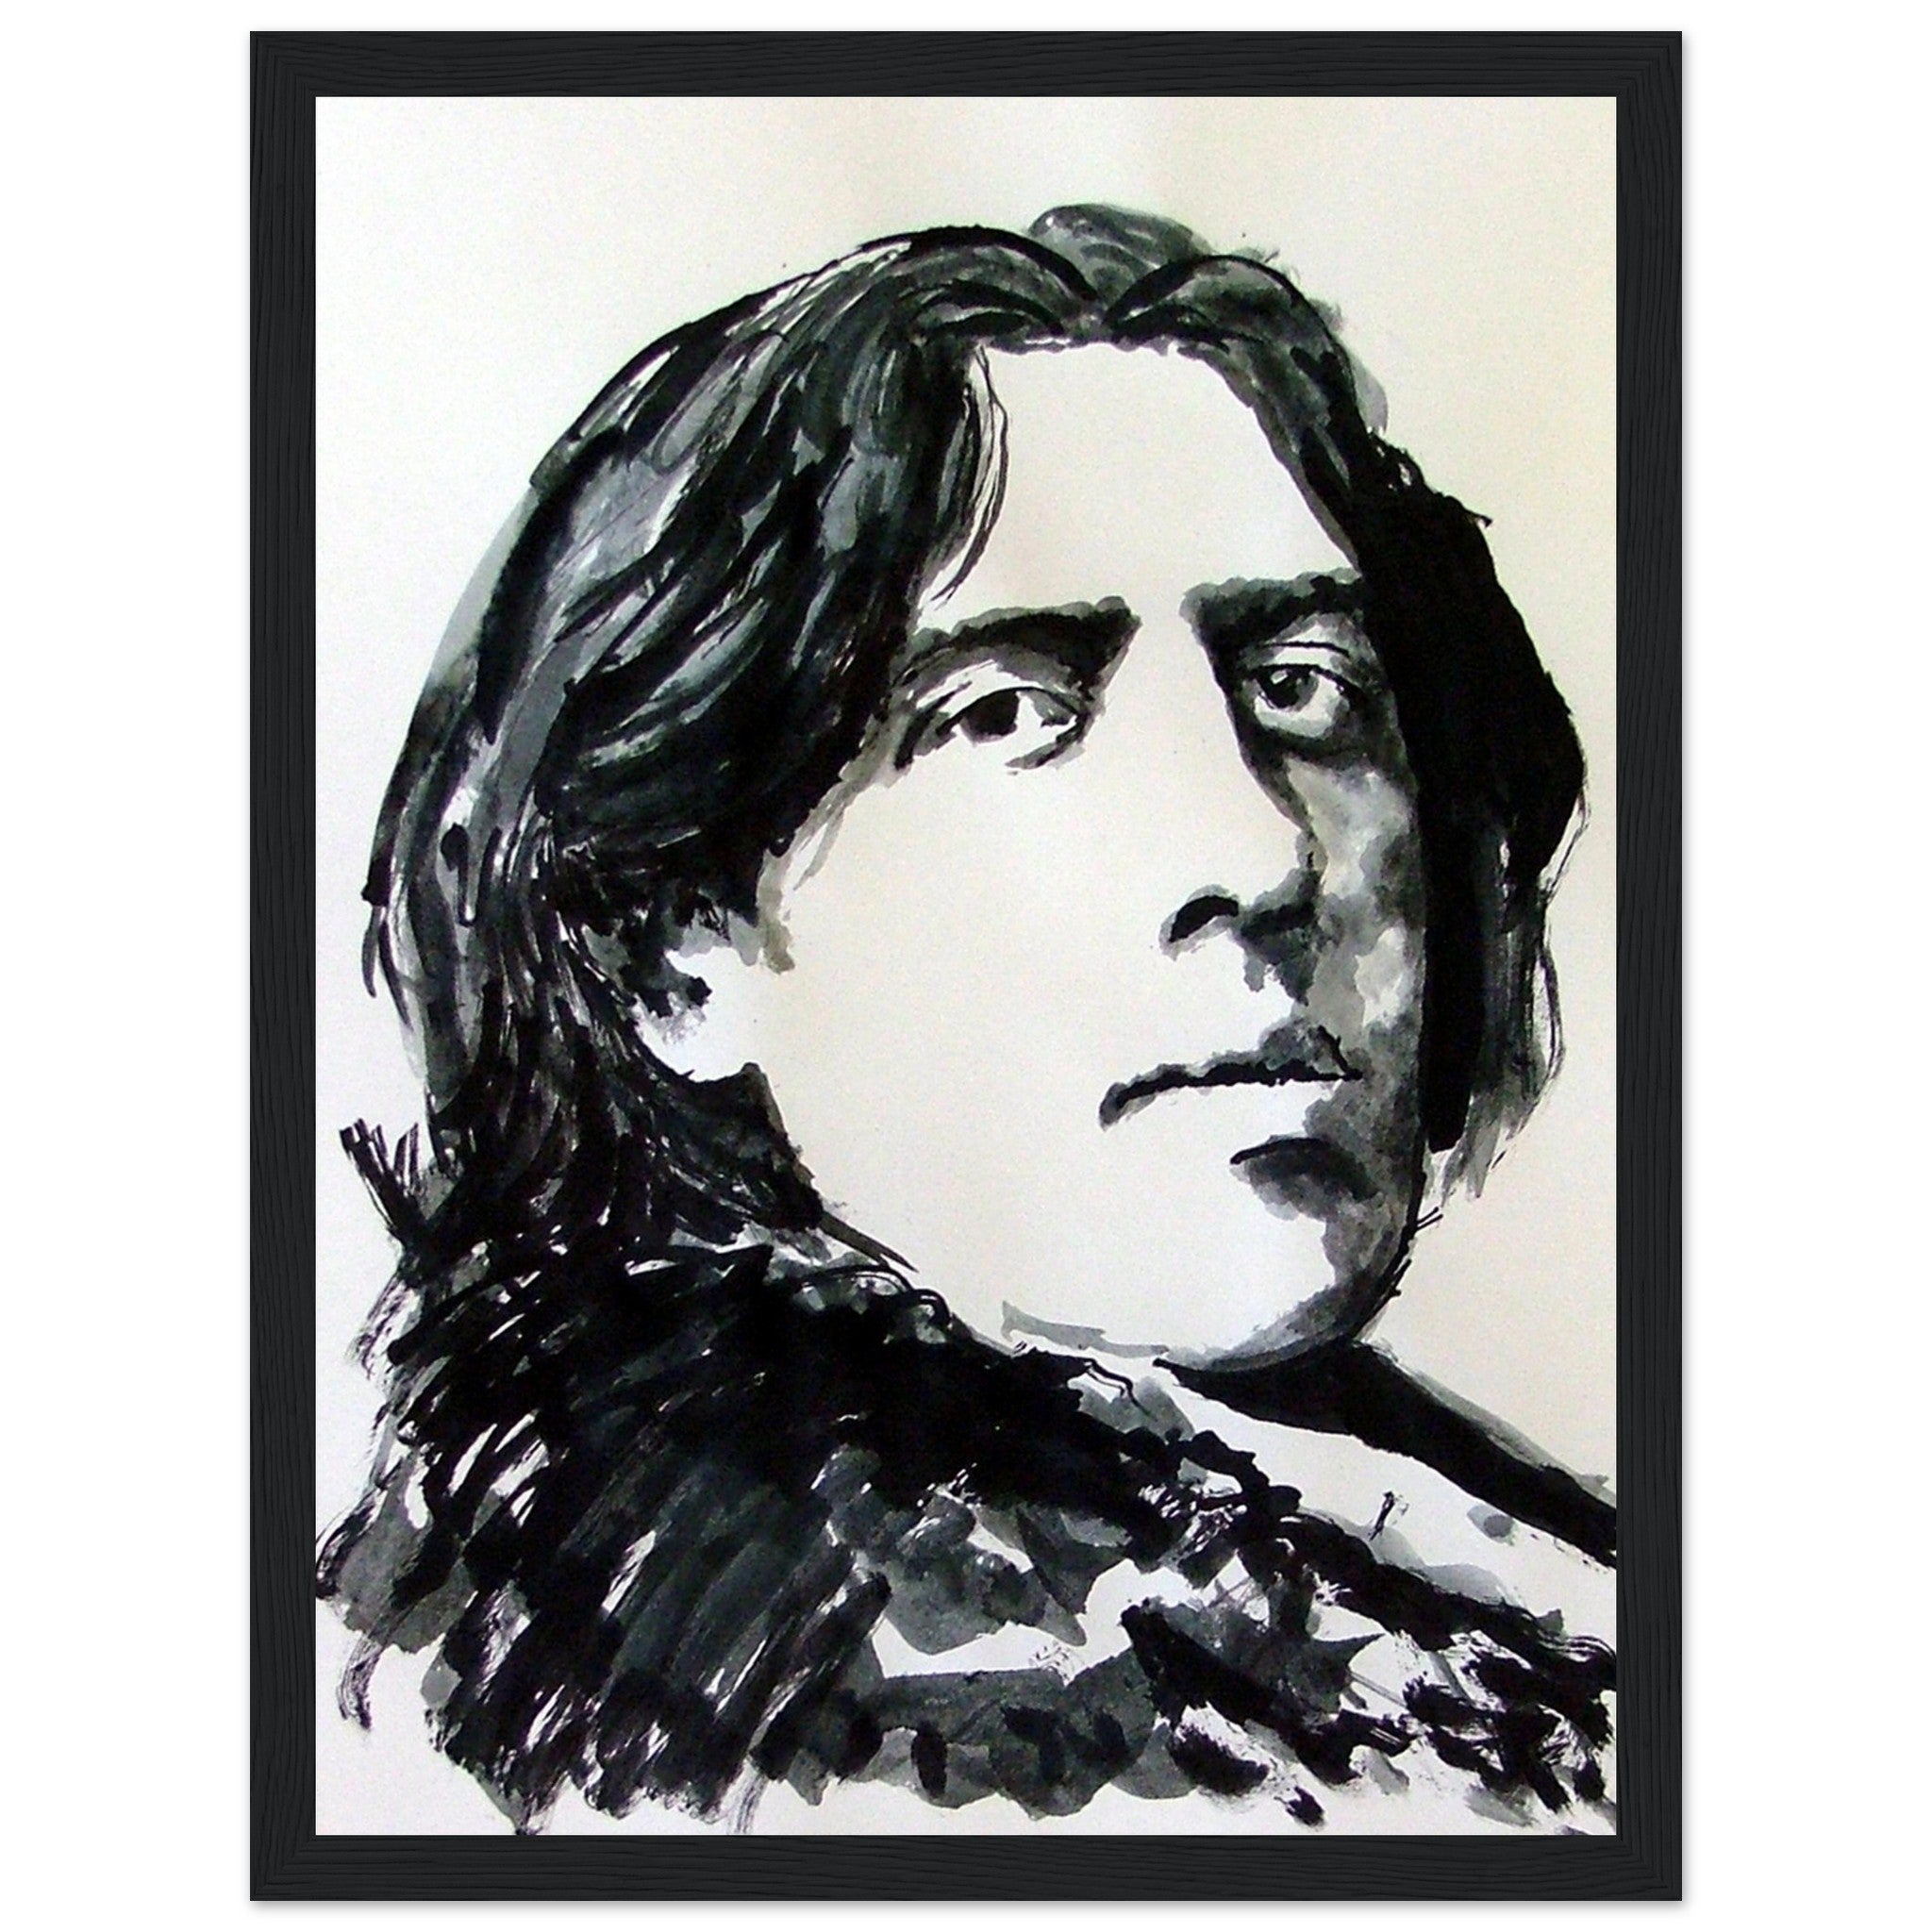 Oscar Wilde Black Wooden Framed Art Print, a tribute to the enduring wit and wisdom of the legendary Irish playwright, poet, and author. Expertly created by Irish artist Ó Maolain.